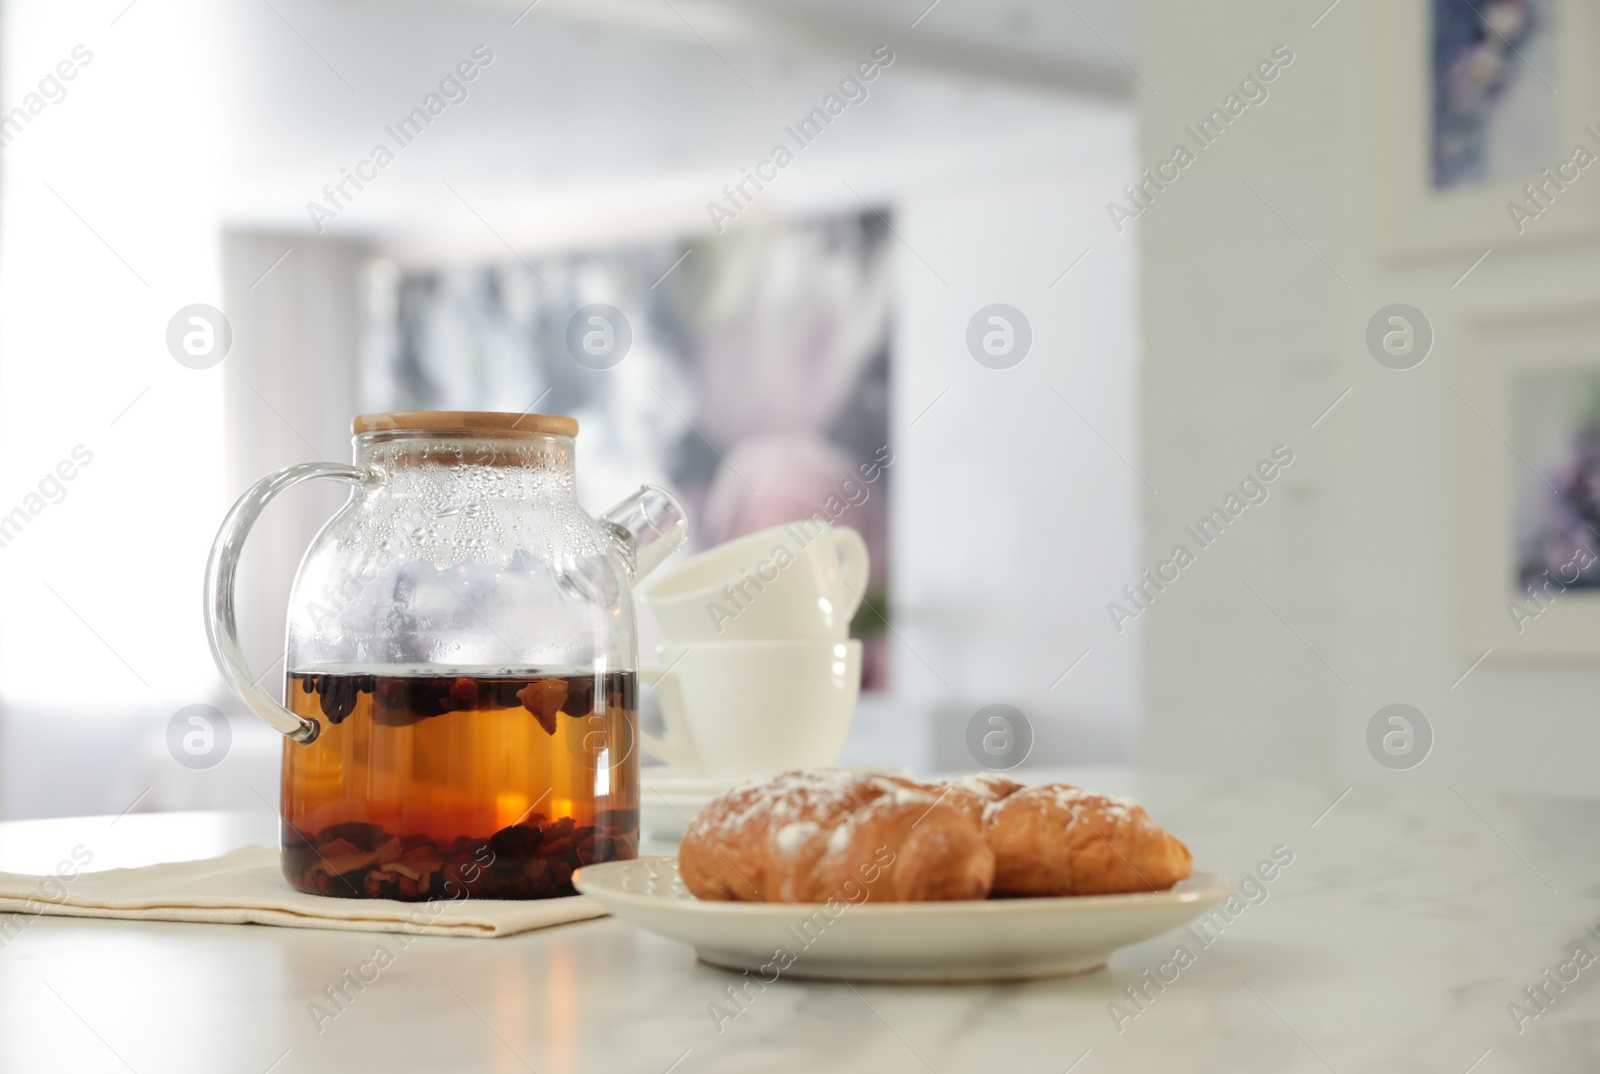 Photo of Breakfast served on table in modern kitchen, space for text